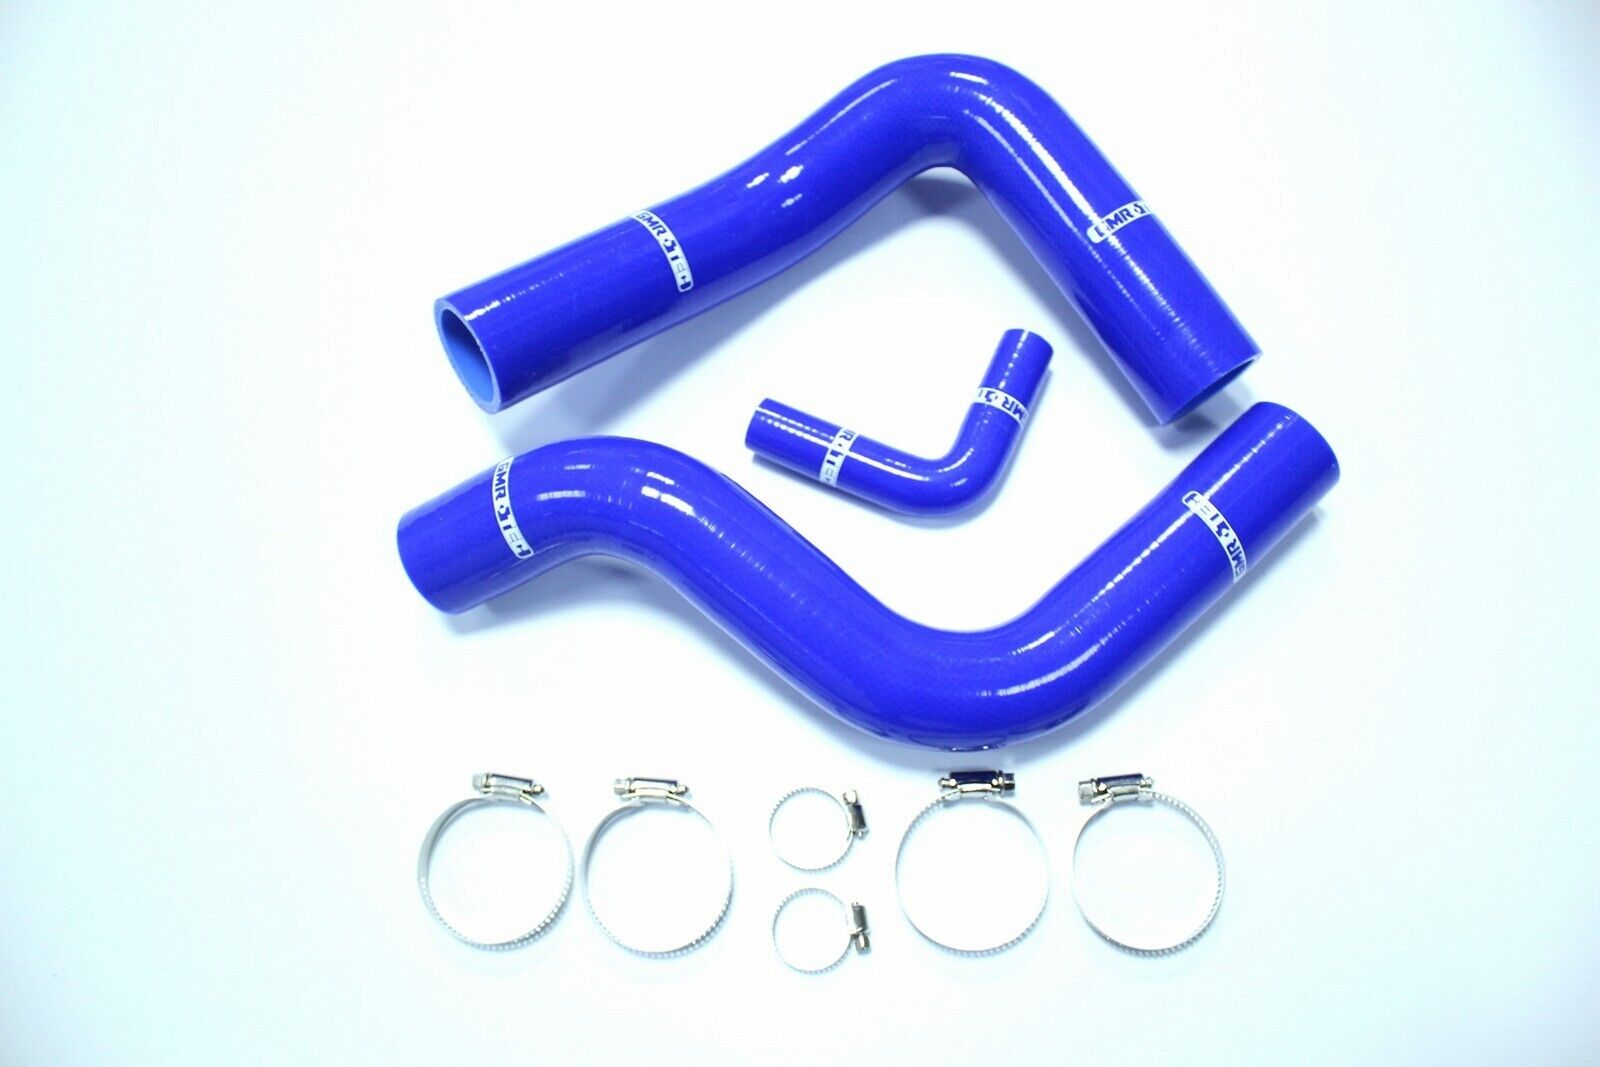  Silicone Radiator Hose Fit 1964-1968 Ford MUSTANG Cobra SHELBY 289-302 ONLY